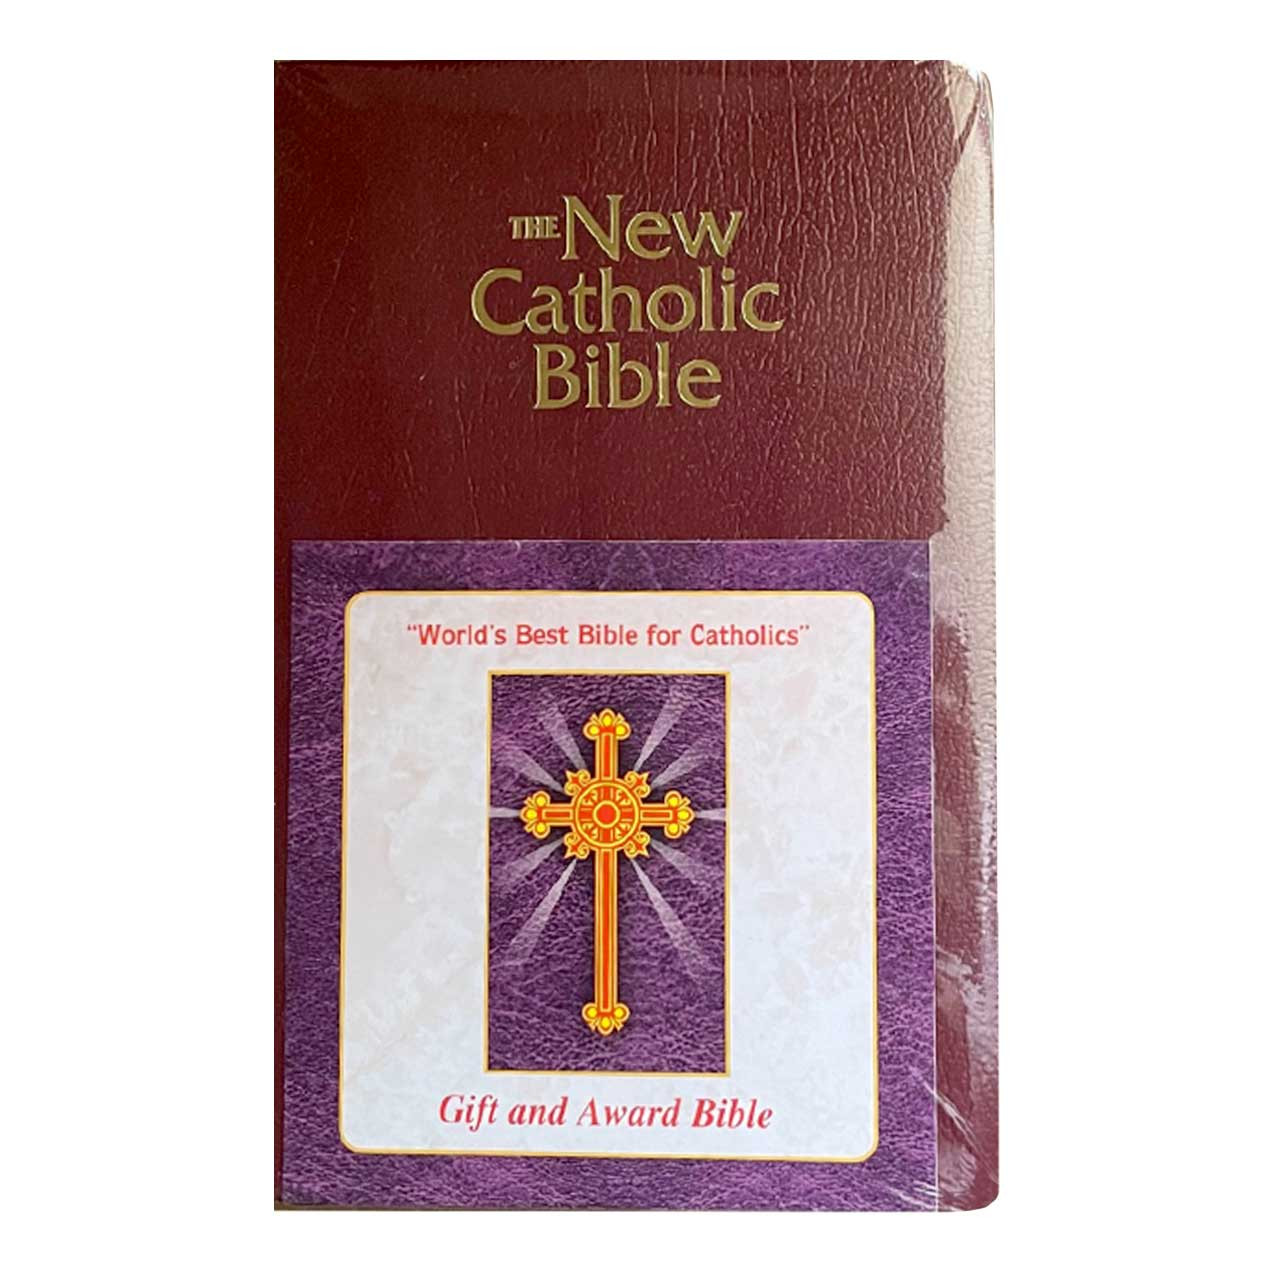 The New Catholic Bible - gift and award edition